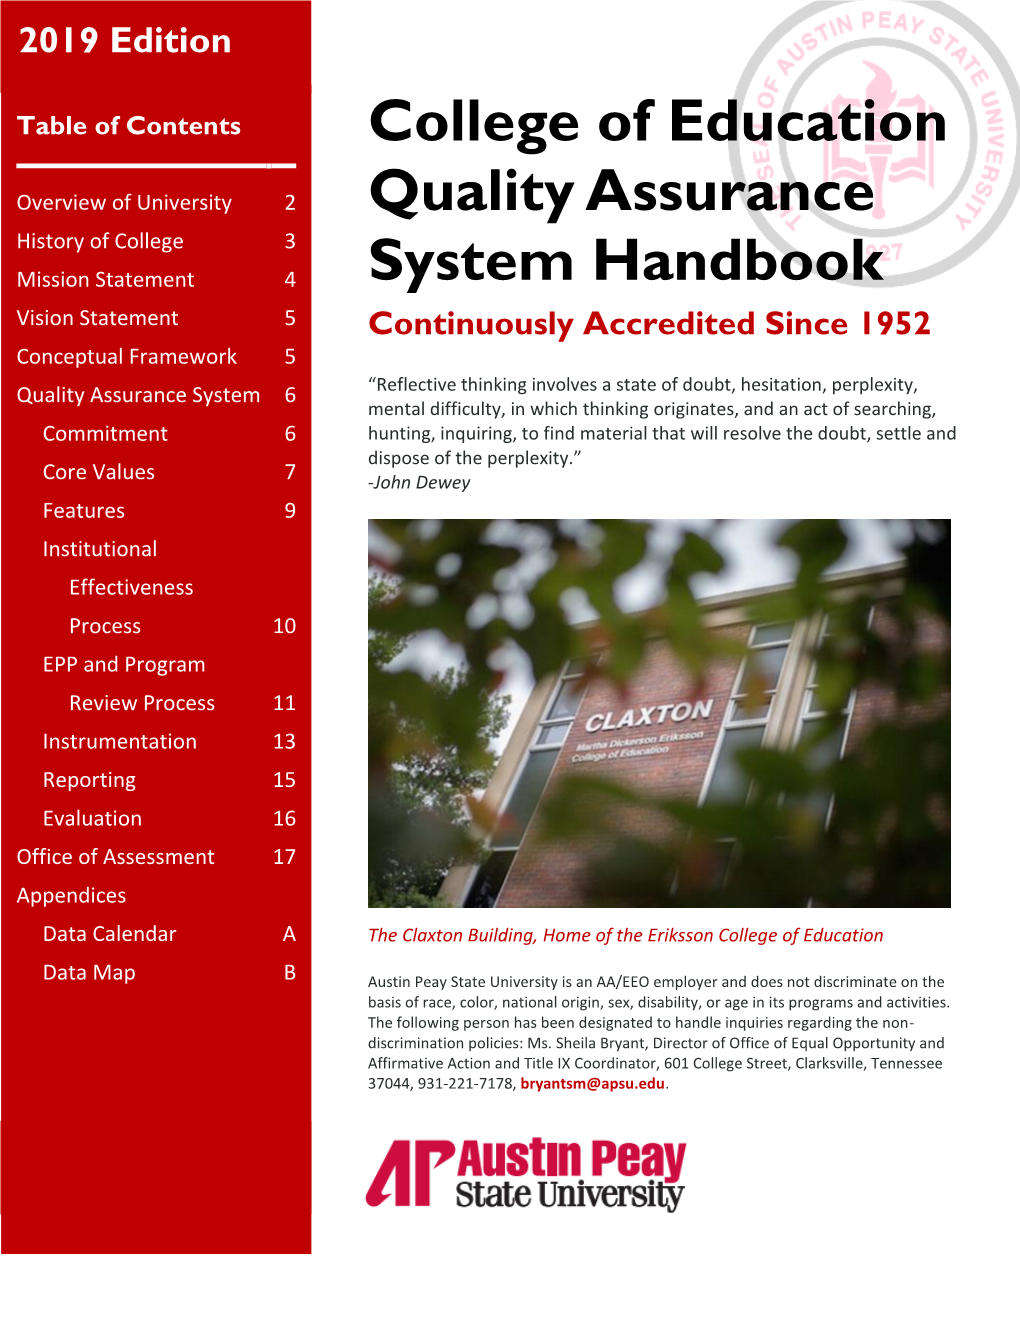 College of Education Quality Assurance System Handbook